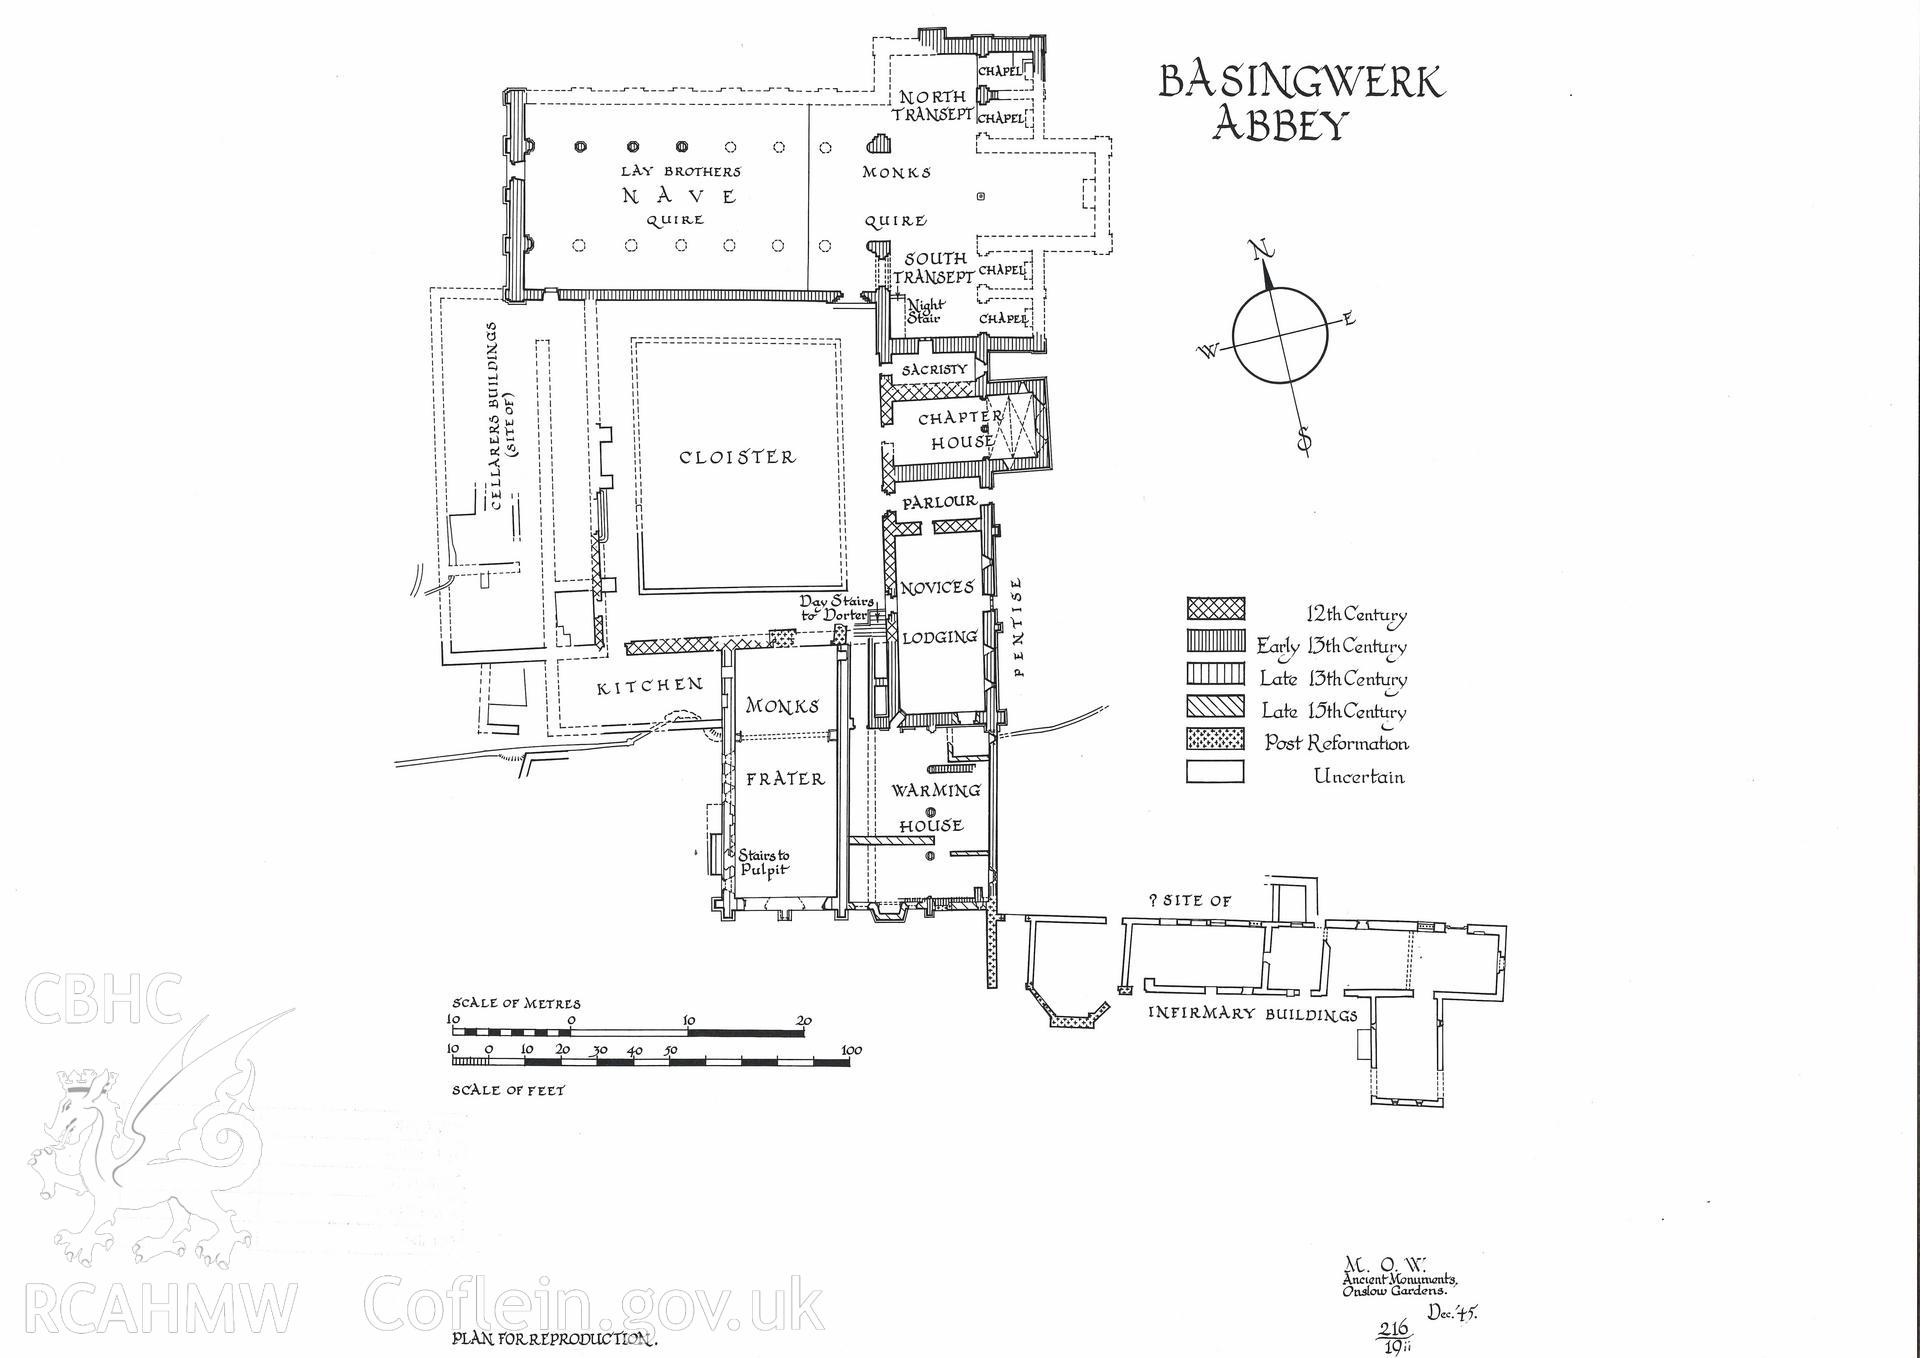 Cadw guardianship monument drawing of Basingwerk Abbey. General plan dated for public. Cadw Ref No: 216/19ii. Scale 1:384.